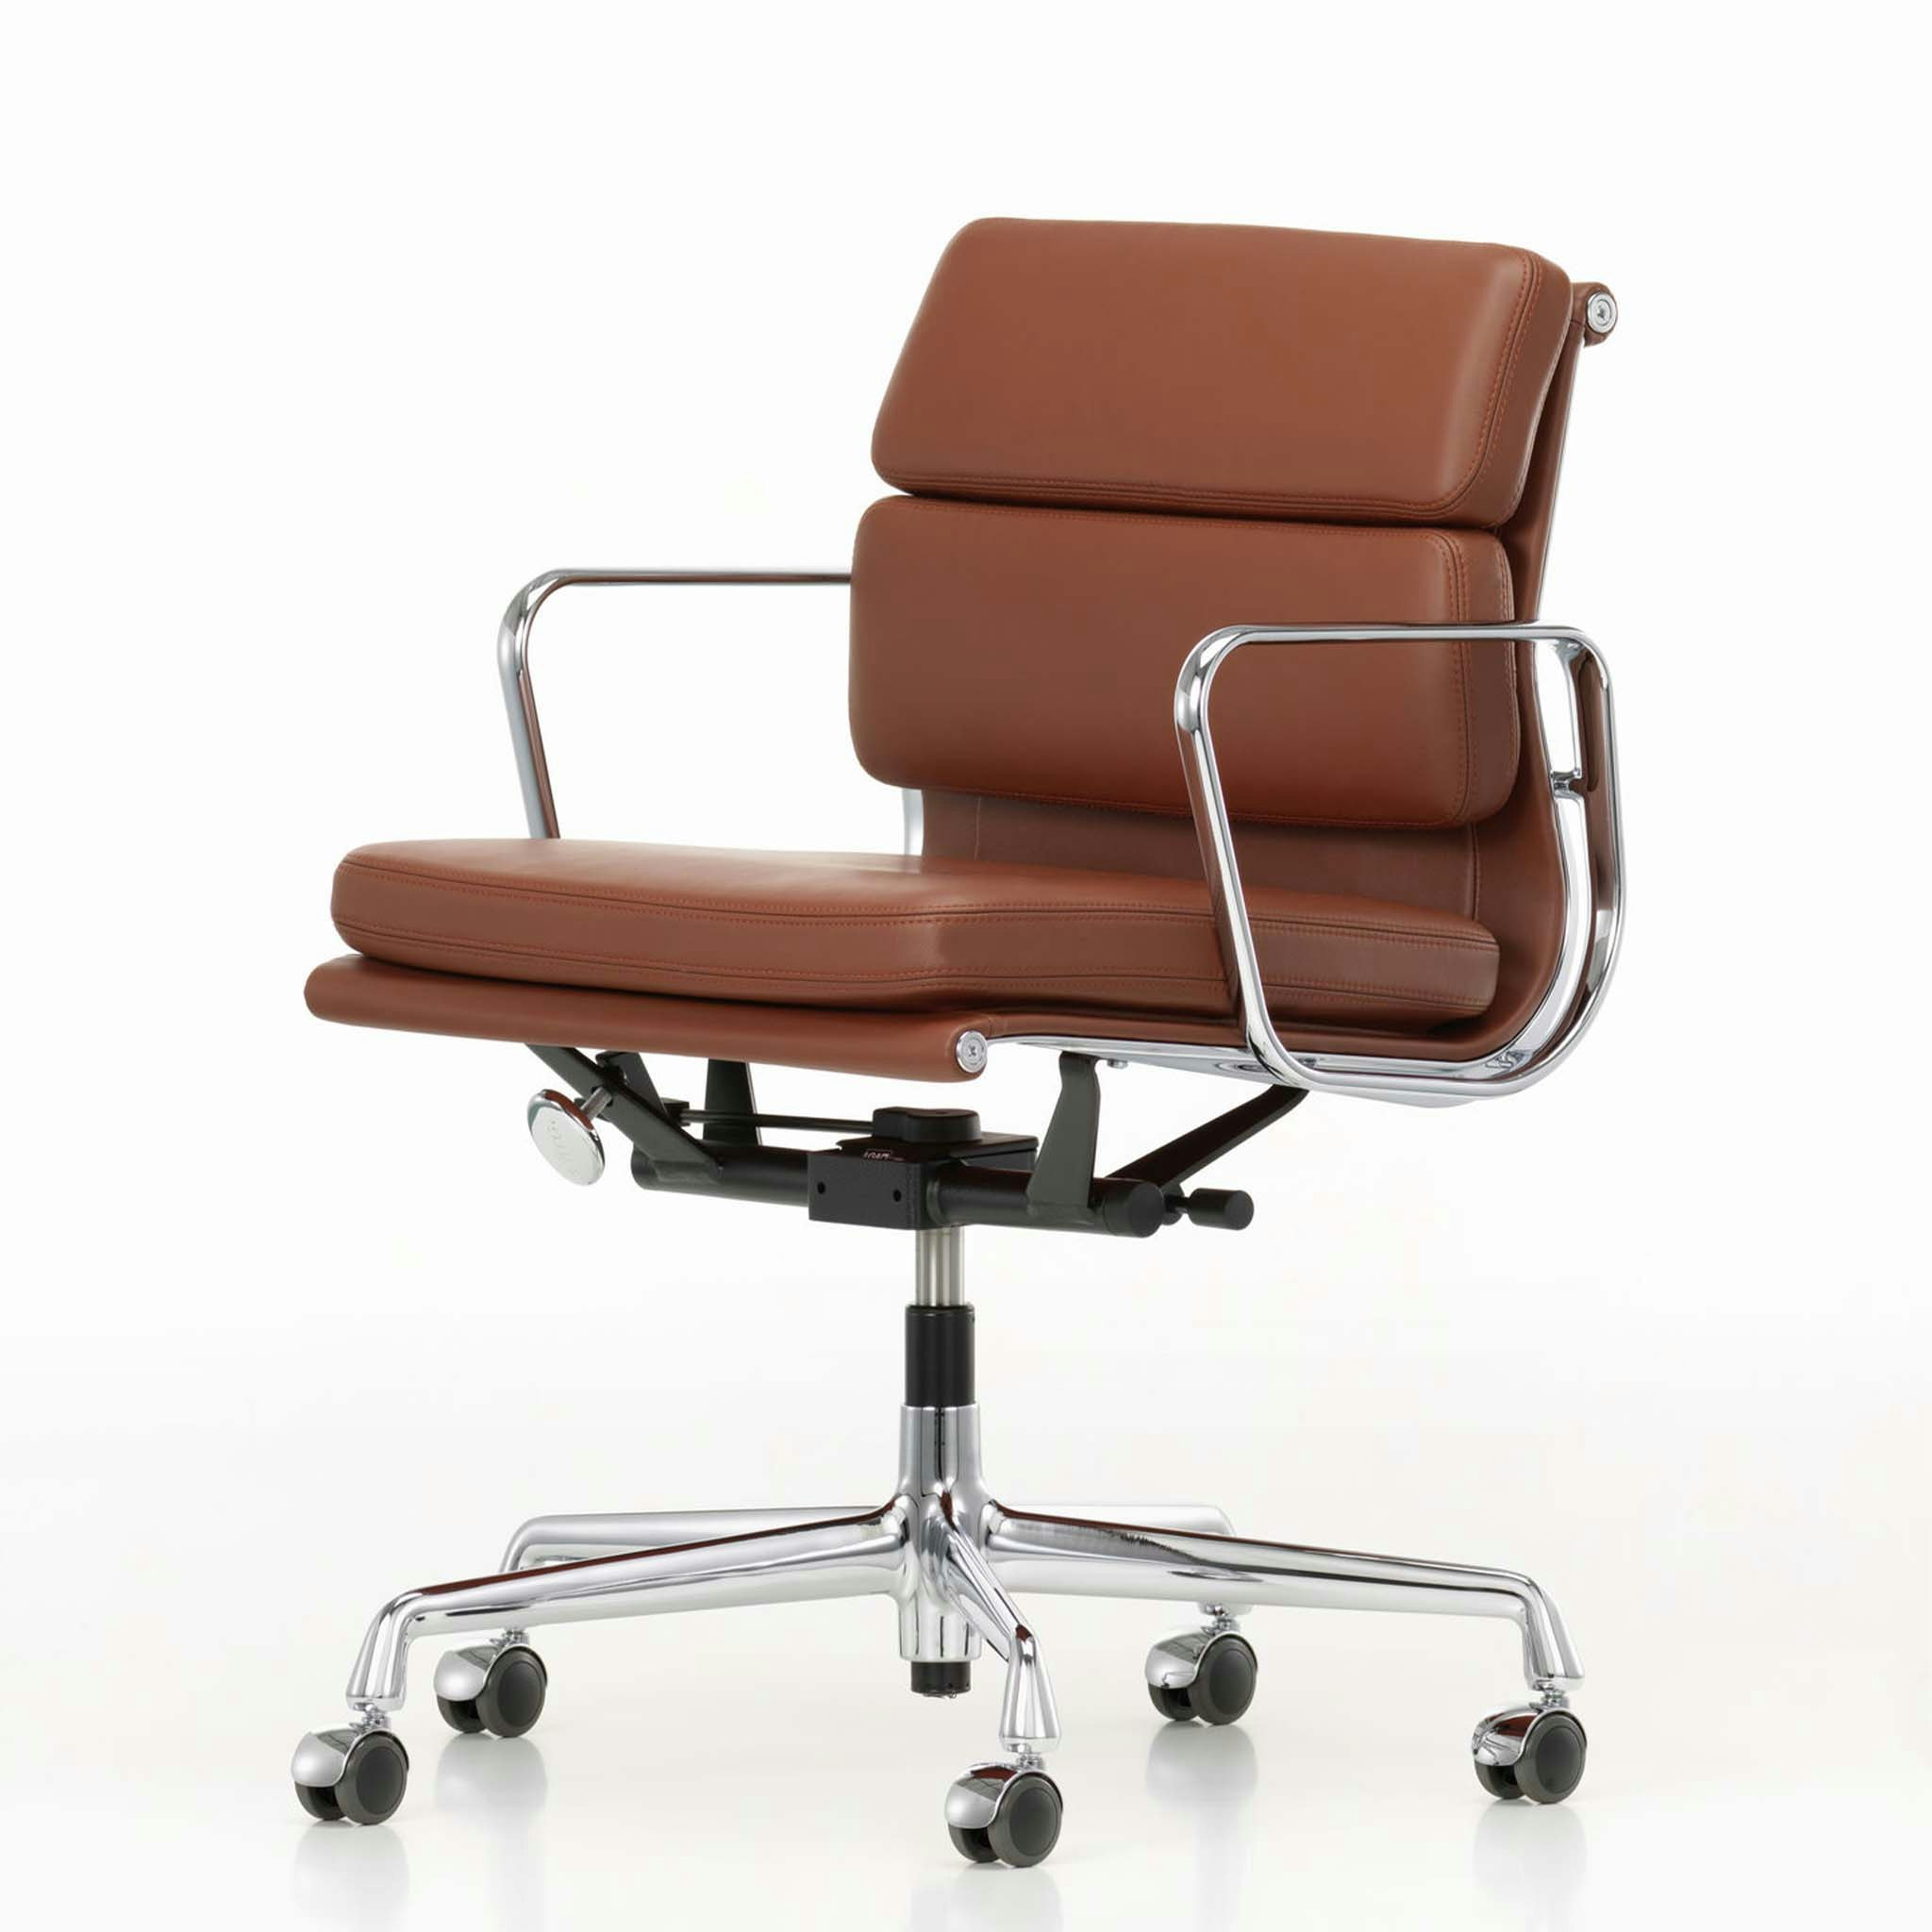 EA 217 Soft Pad chair by Vitra